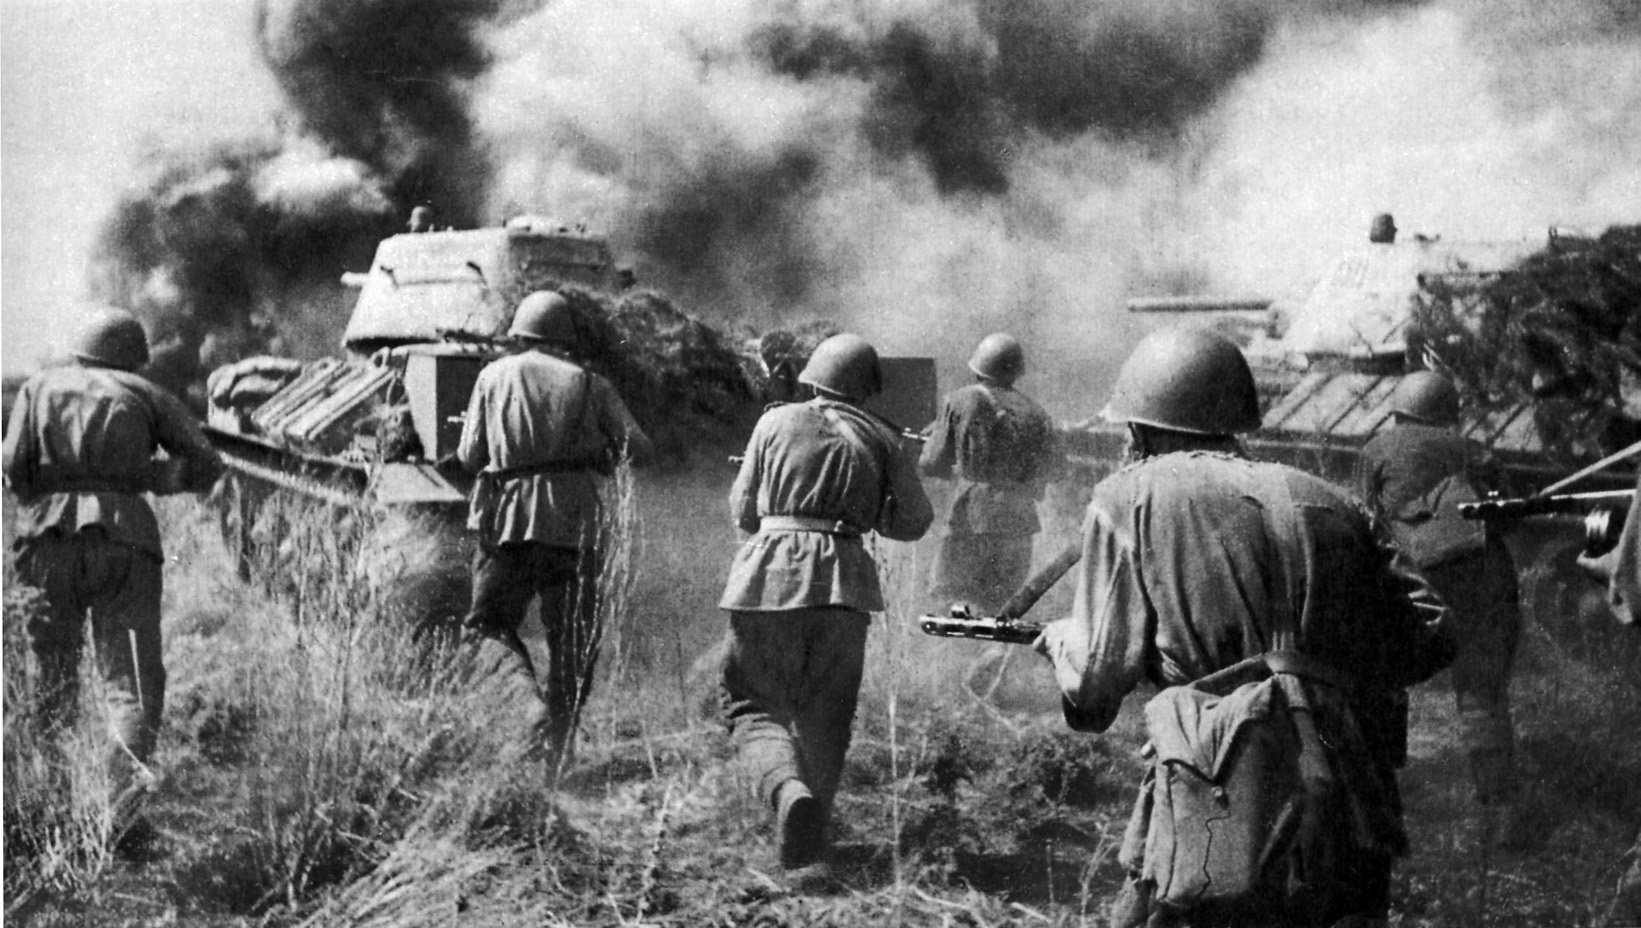 Soviet troops advance behind the cover of a tank during the desperate fighting at Kursk in the  summer of 1943. Rokossovsky believed that Stalin had entrusted him with a key role that led to the defeat of the German forces and doomed their Operation Citadel to failure.